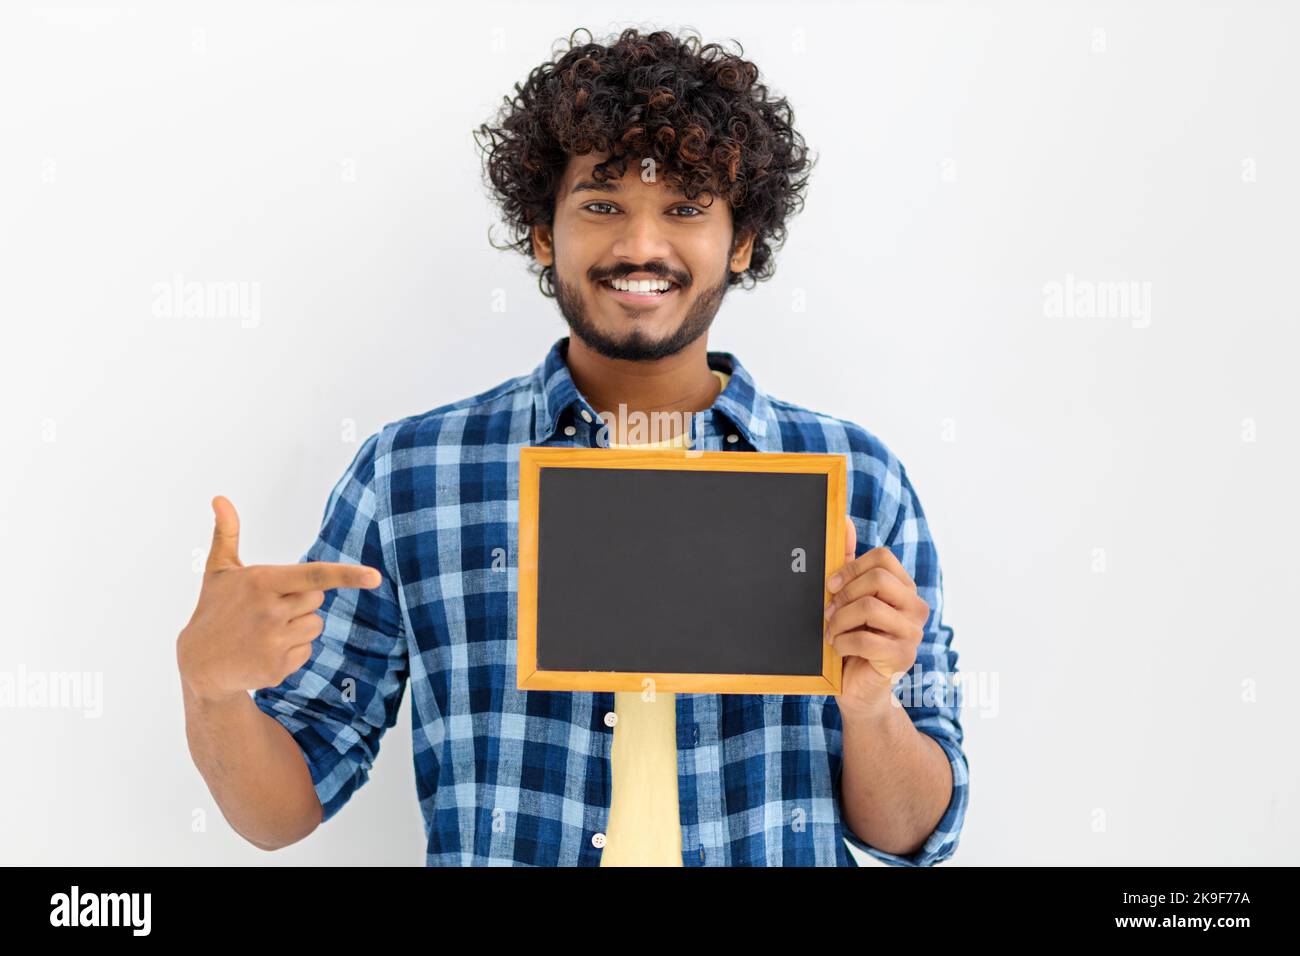 Portrait of young Asian man with chalkboard on white background. Male with curly hair holding a blank chalk board Stock Photo